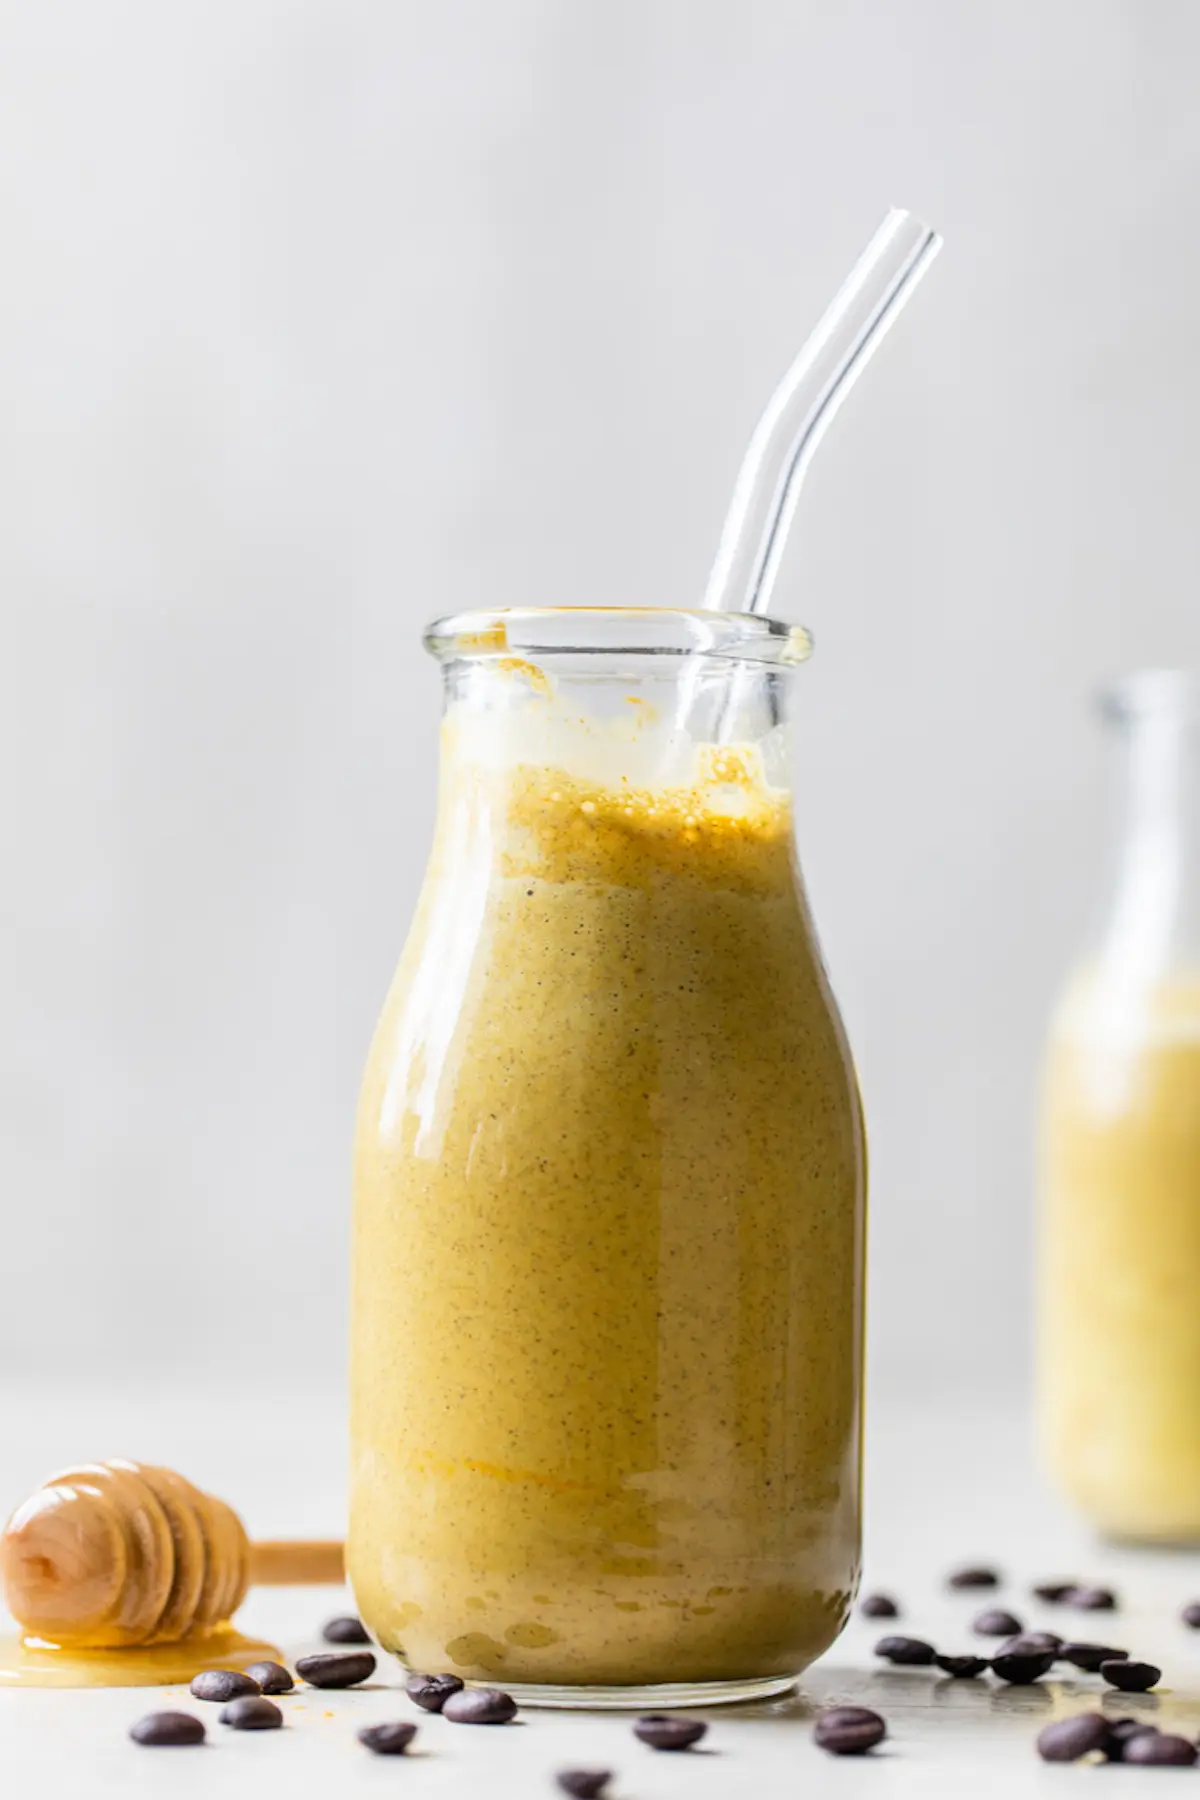 glass jar filled with a yellow-colored smoothie